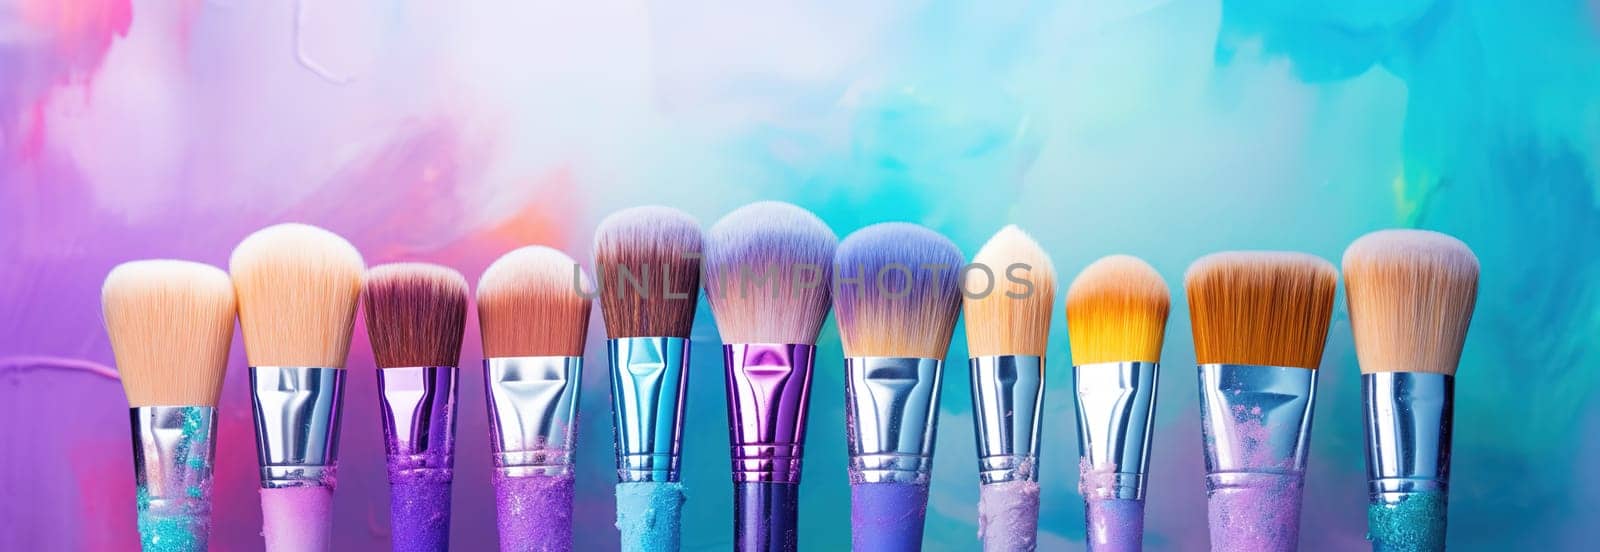 row of brushes laid out flat on a canvas, various shades of purple and blue against a colorful background, displaying stationery, Generated AI